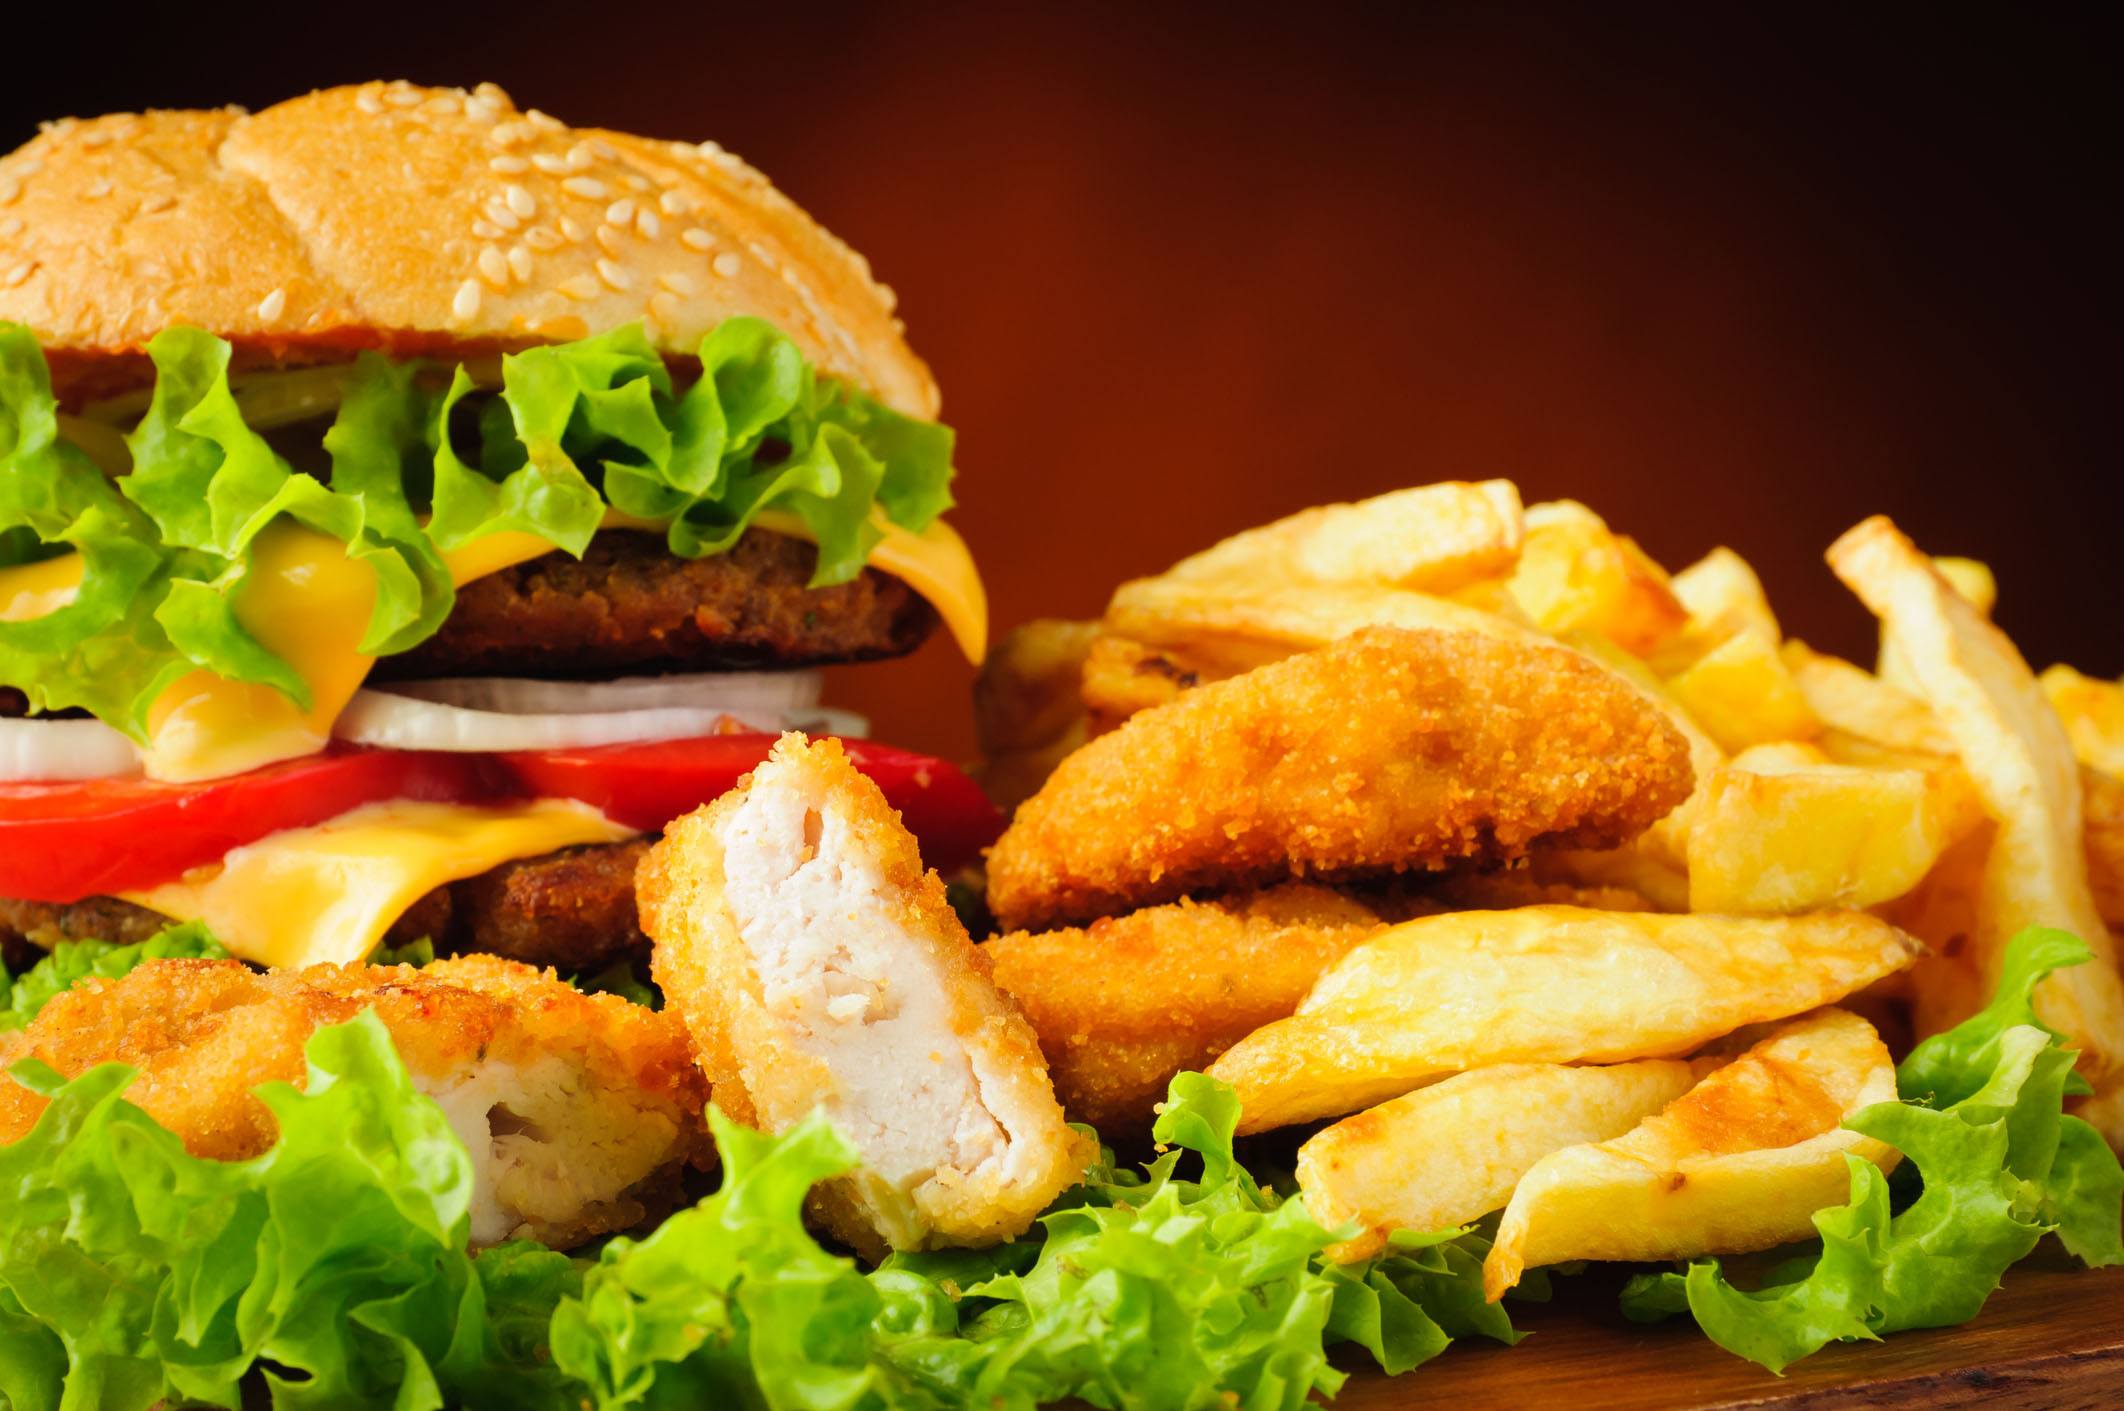 Here’s how Consumers Rank the Top 6 Fast Food Restaurants in the US